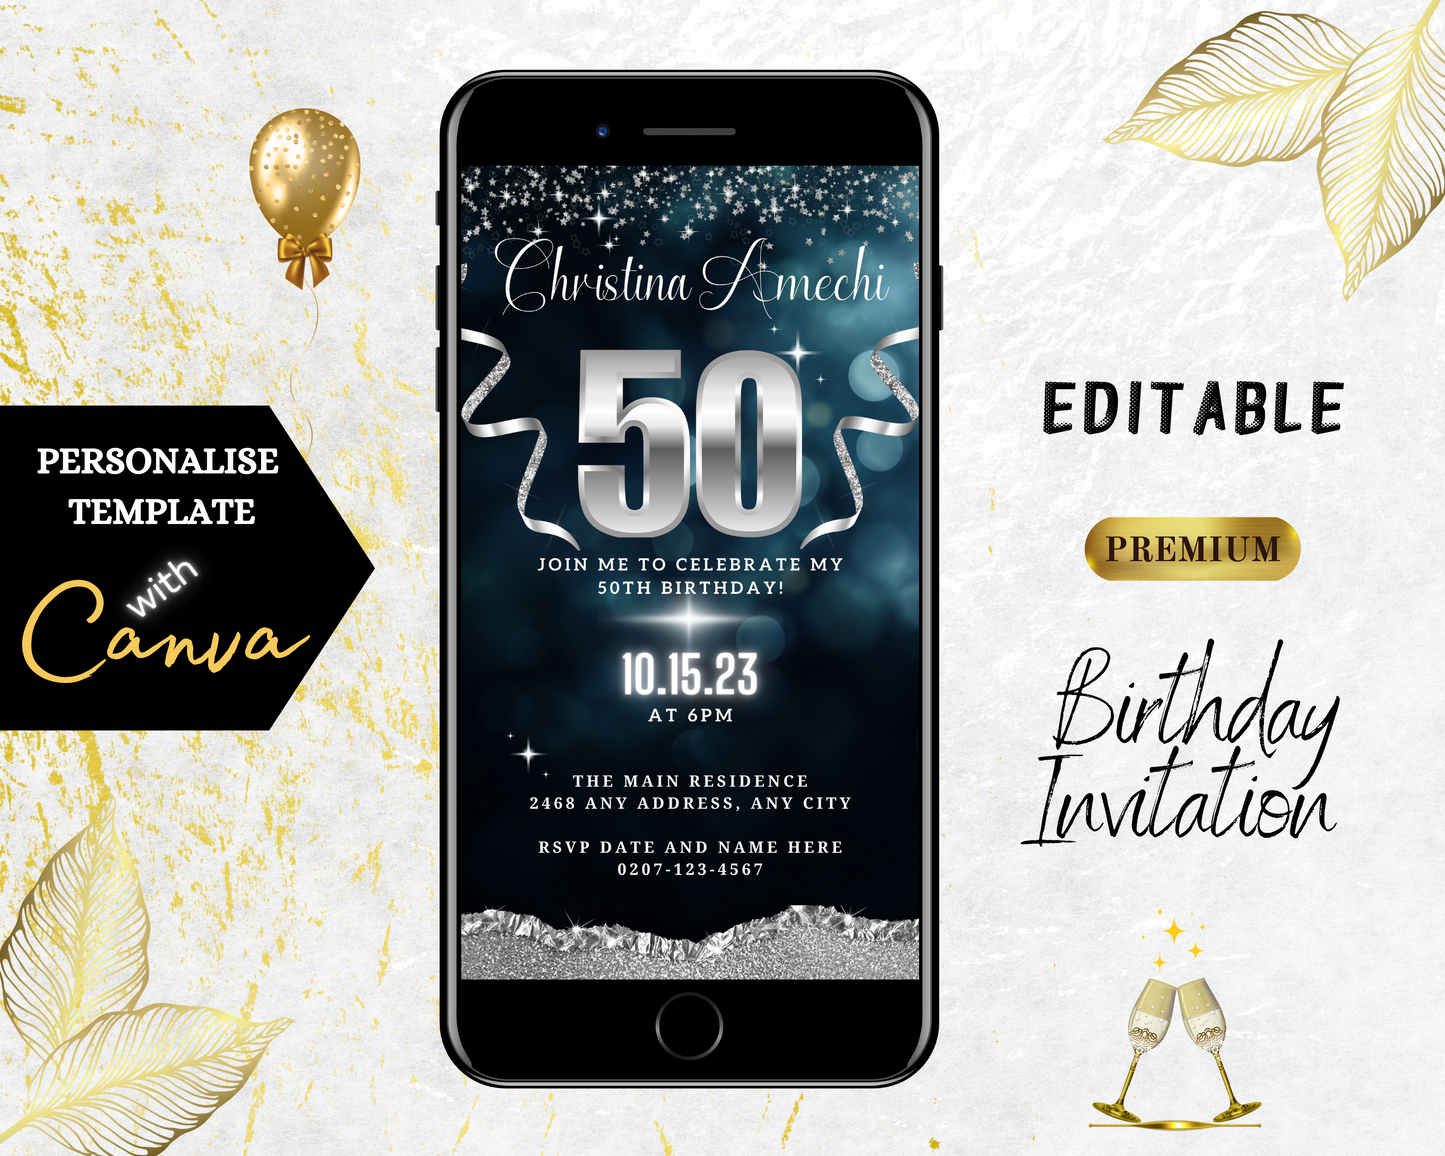 Navy Blue Silver Glitter digital 50th birthday invitation displayed on a smartphone, featuring editable text and decorative elements for customisation in Canva.